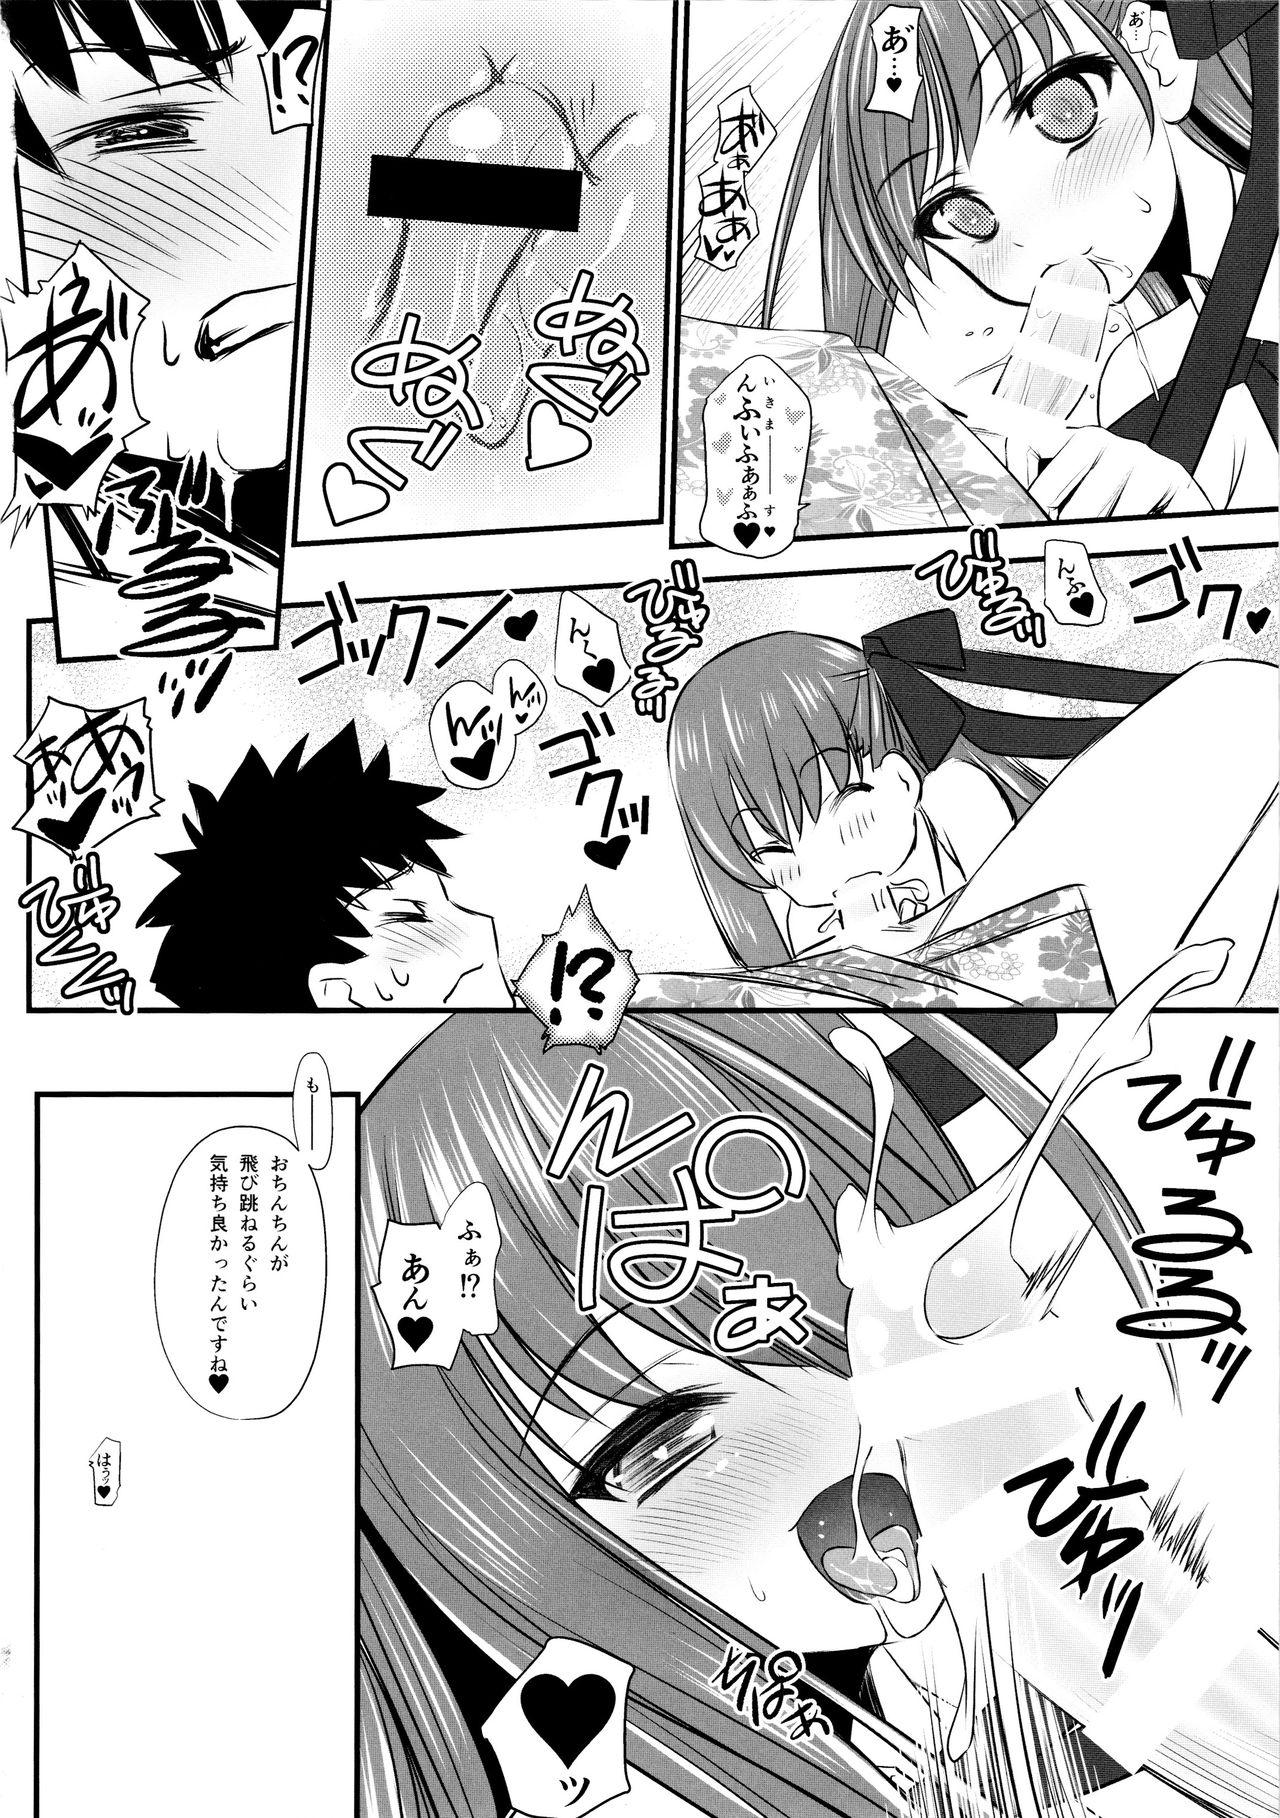 Casa (C96) [Yakan Honpo (Inoue Tommy)] Queen [Kyuuin] BB-chan (Fate/Grand Order) - Fate grand order Sexteen - Page 6